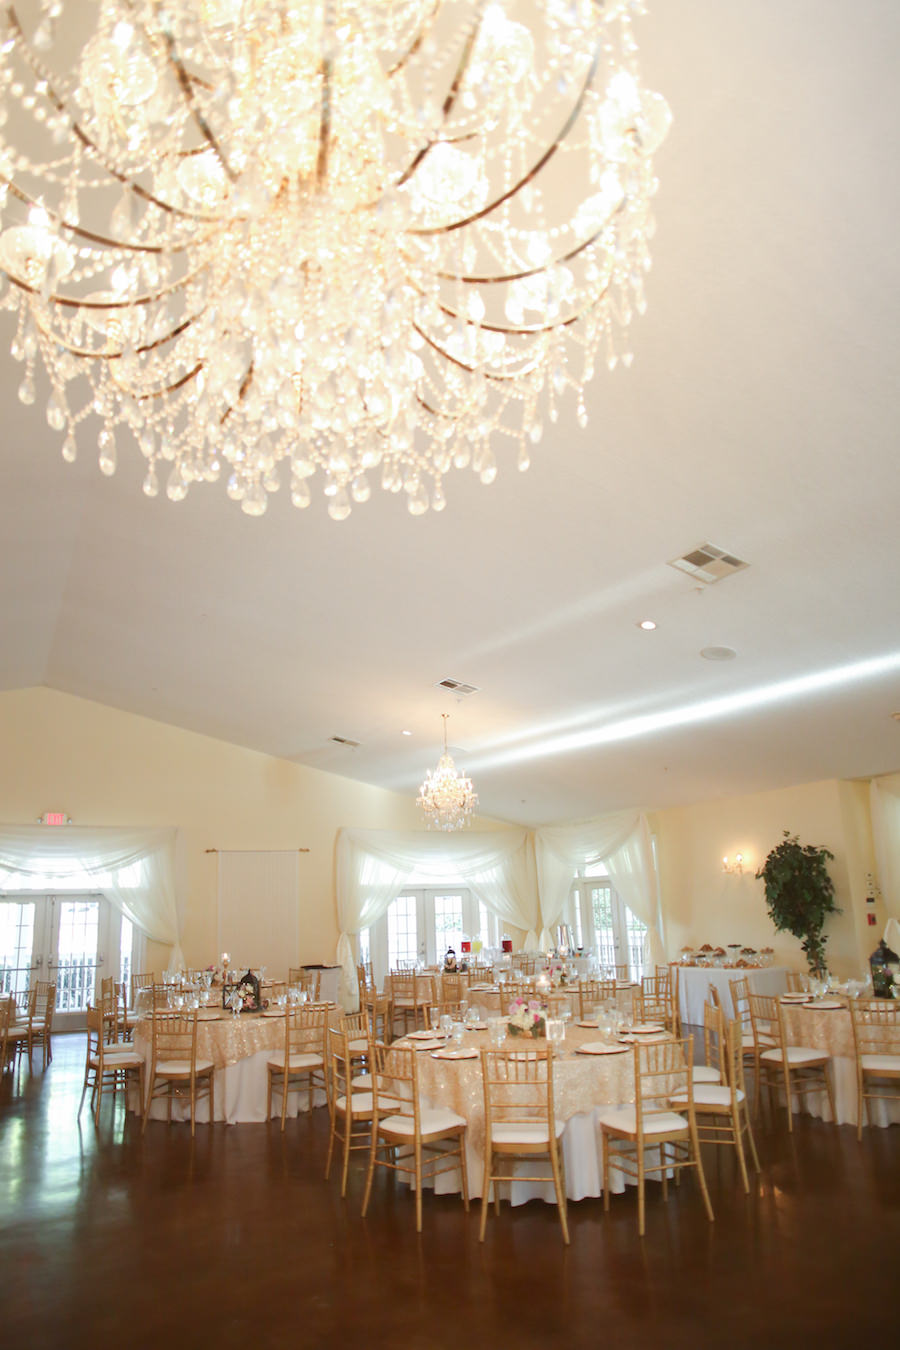 Rustic Elegant Wedding Reception at Tampa Bay Wedding Venue The Lange Farm in the Garden House Ballroom | Tampa Bay Wedding Catering Company Olympia Catering